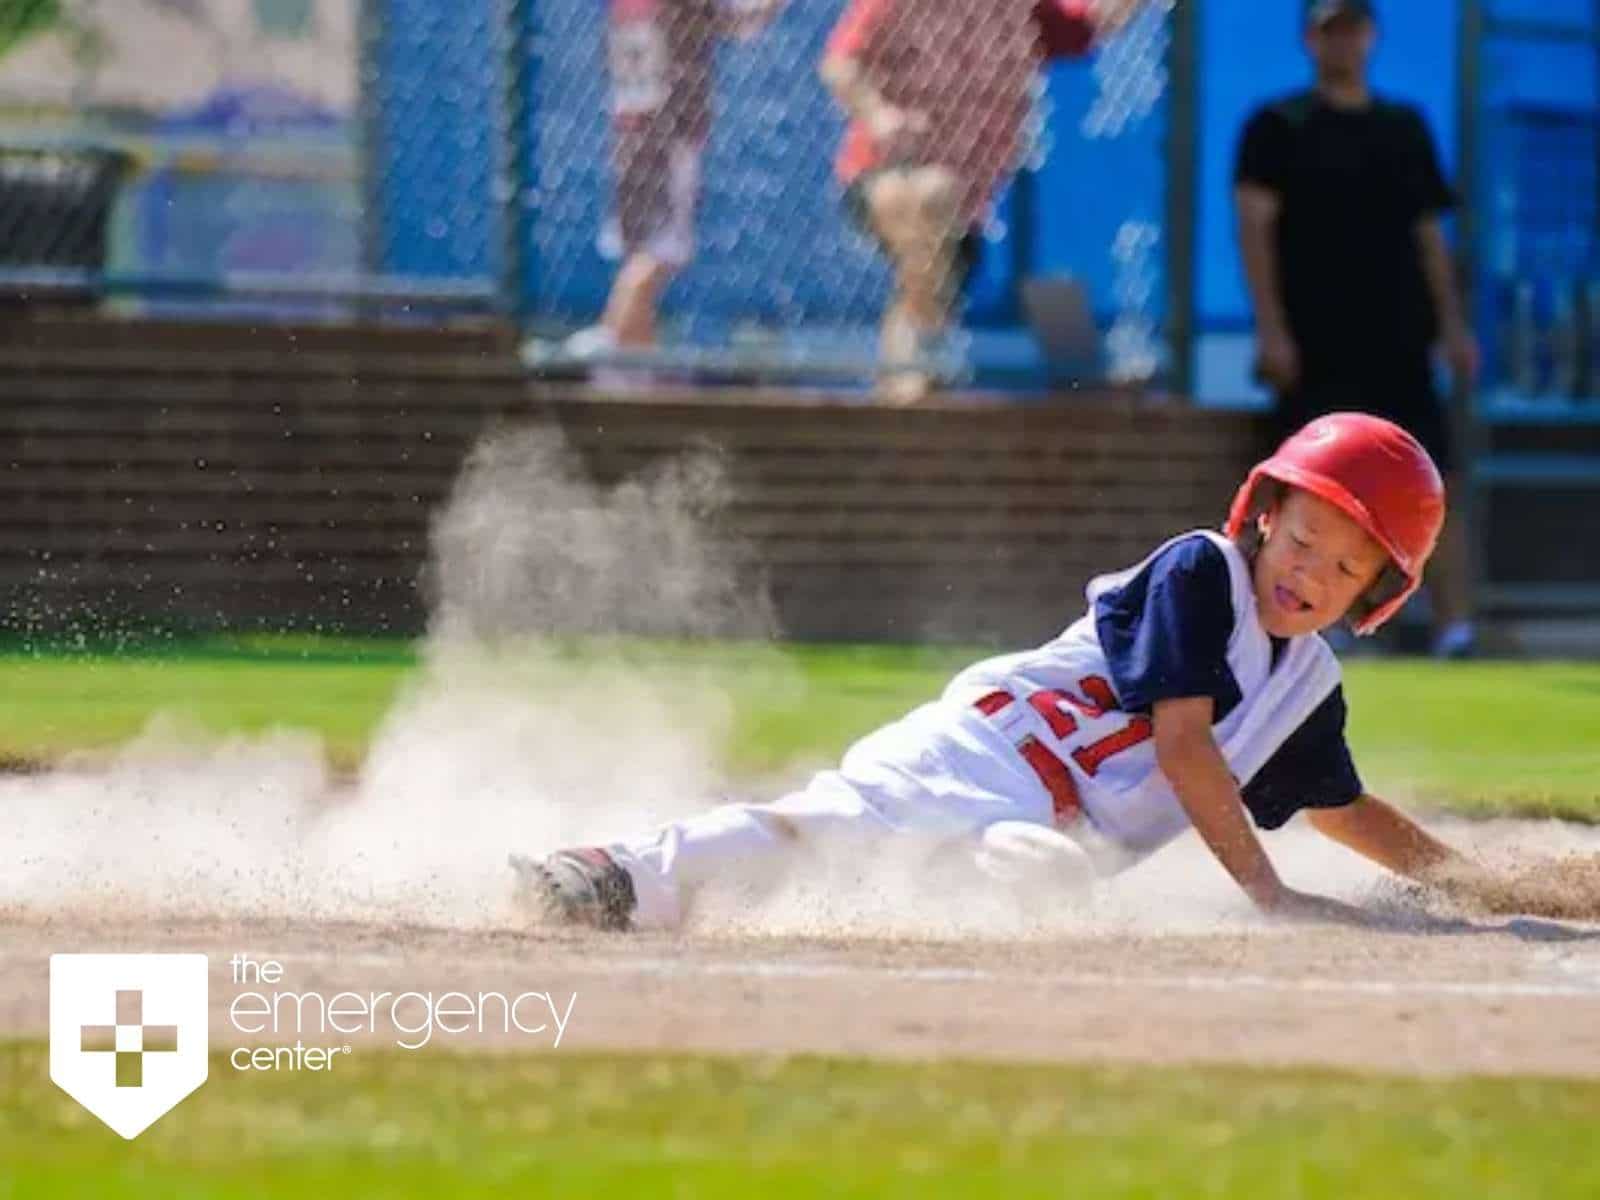 Texas Child Playing Baseball In Little League